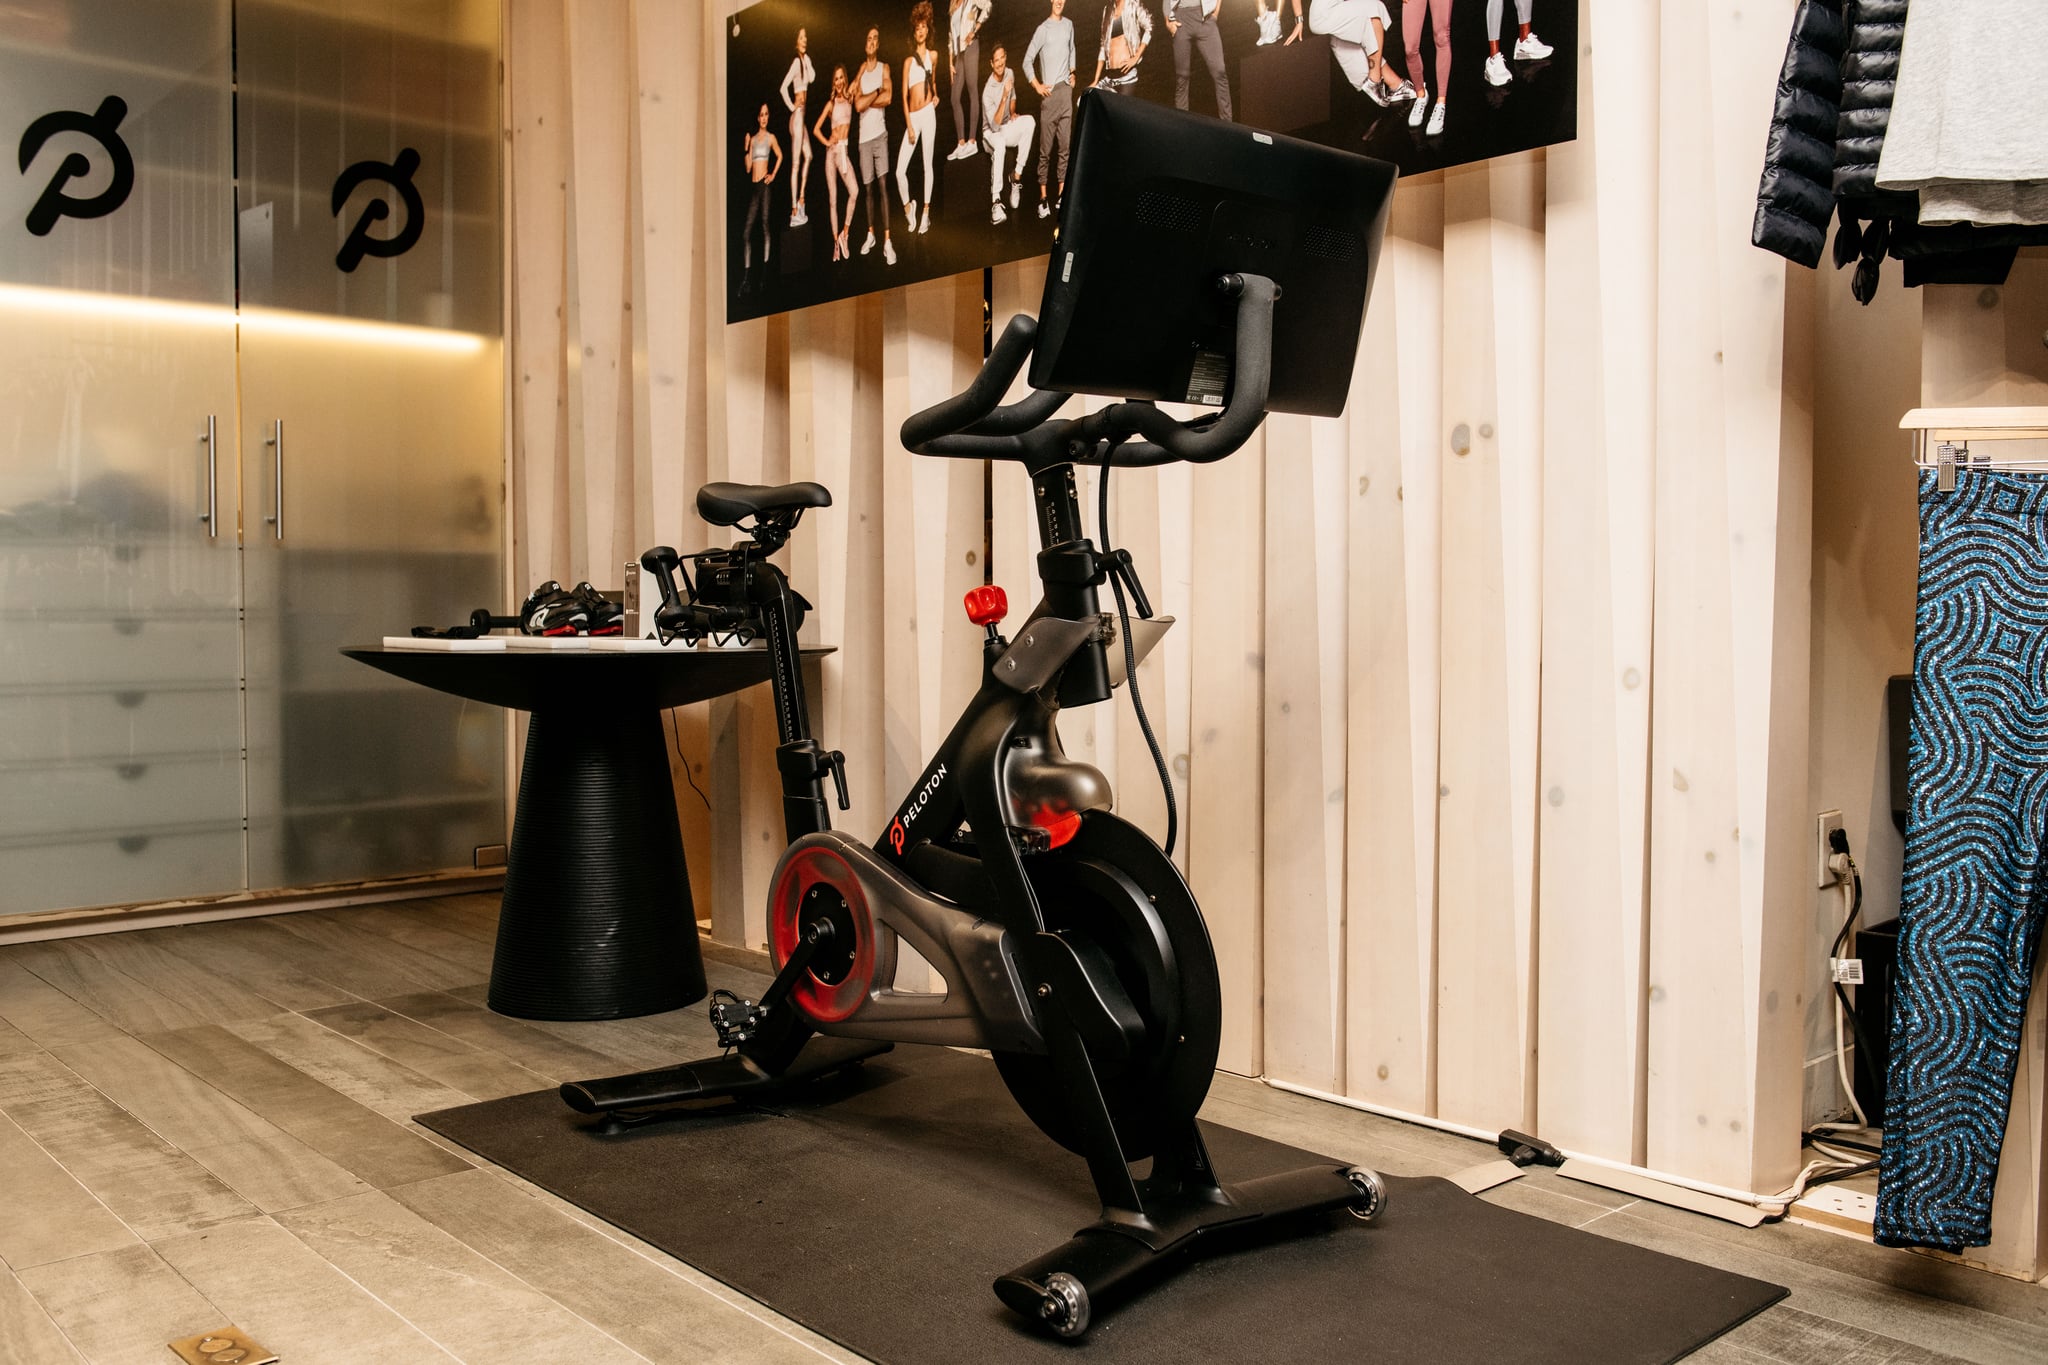 NEW YORK, NY - DECEMBER 04: A Peloton stationary bike sits on display at one of the fitness company's studios on December 4, 2019 in New York City. Peloton and its model of on-demand video cycling classes has come under fire after the release of a new commercial that has been criticized by some as sexist and classist. (Photo by Scott Heins/Getty Images)